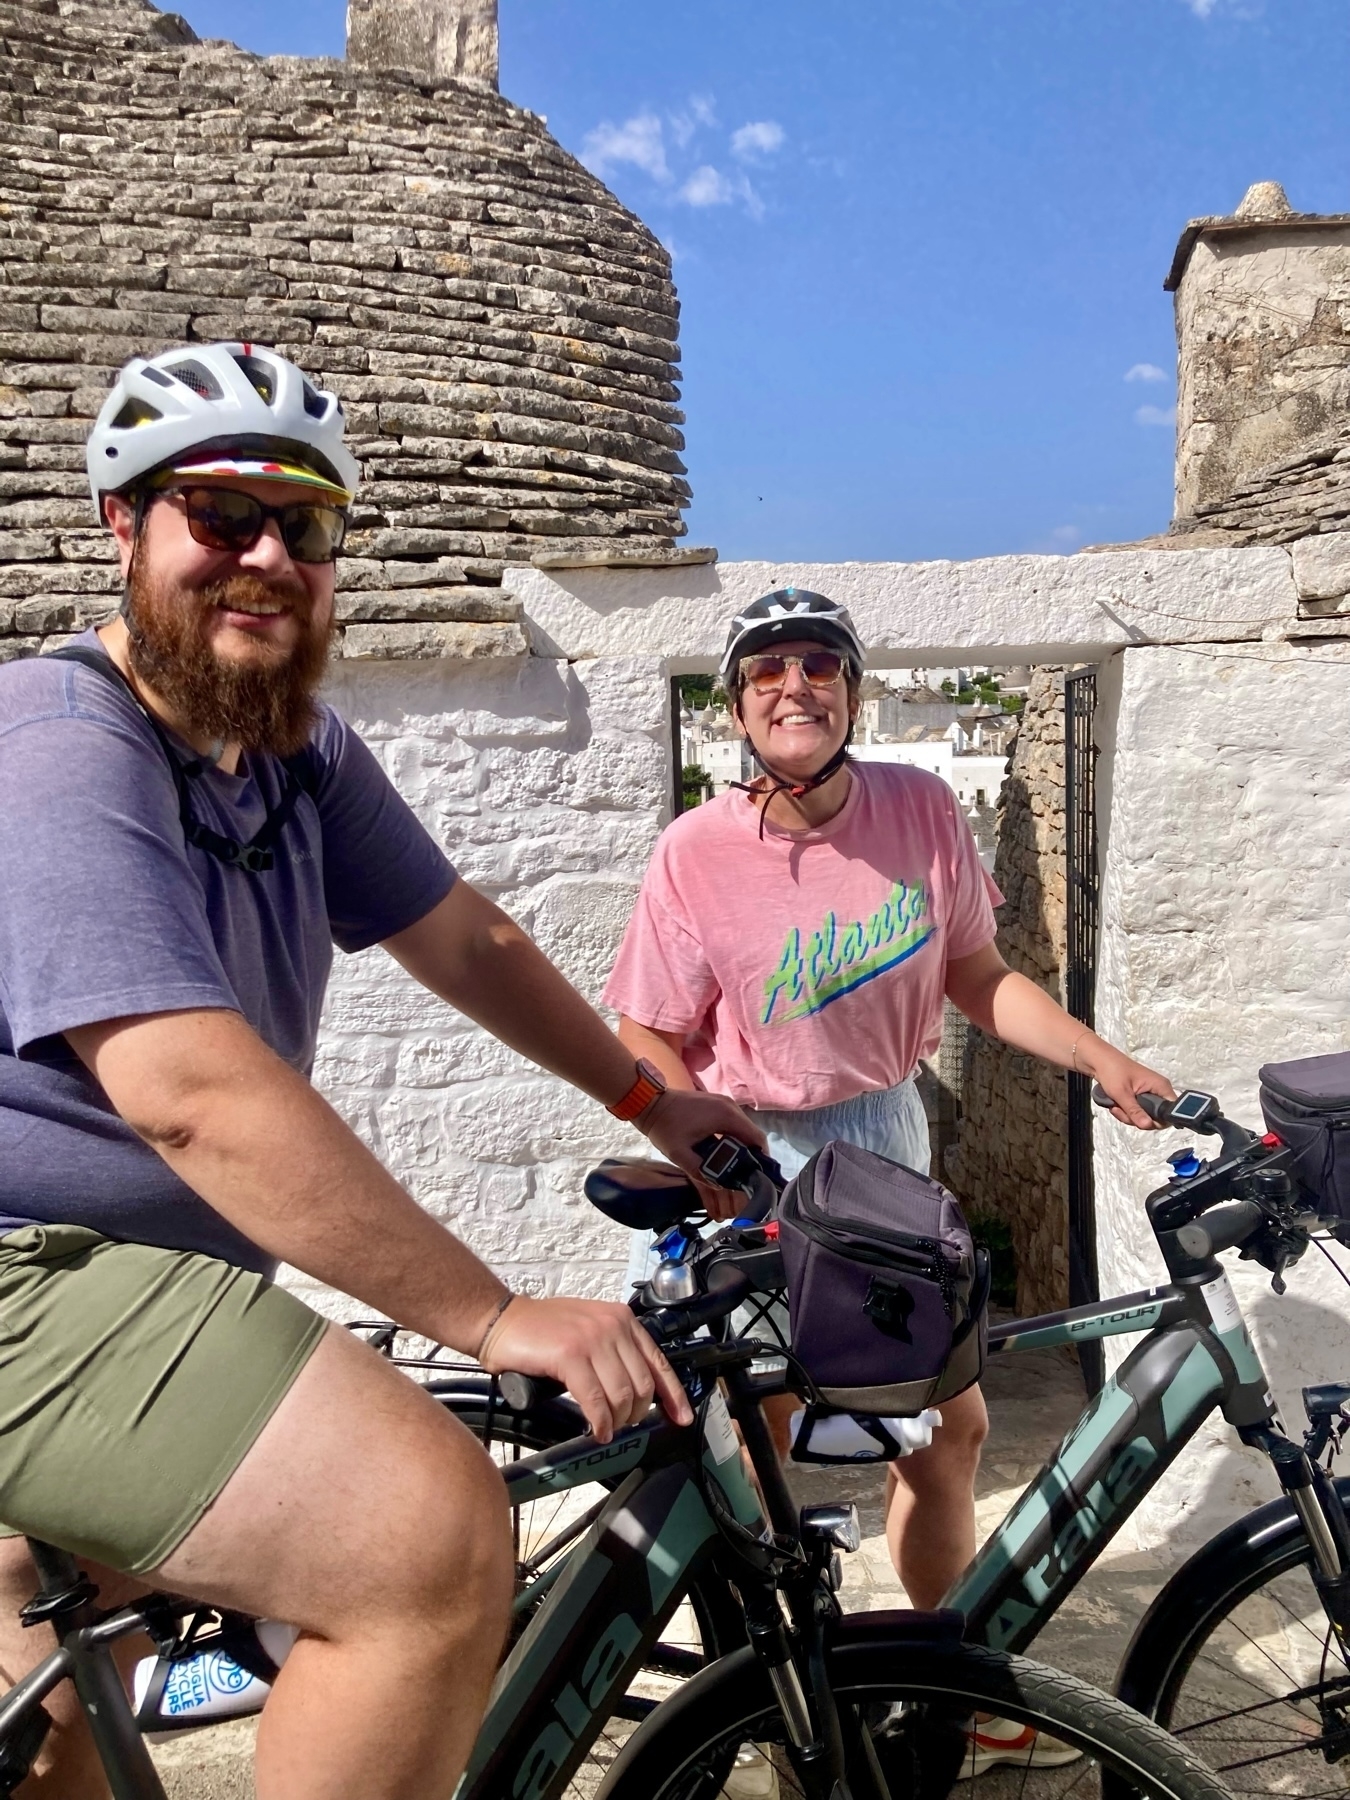 A bearded man and a woman, both wearing helmets and sunglasses, are posing with their bicycles in front of a traditional stone building with a conical roof.